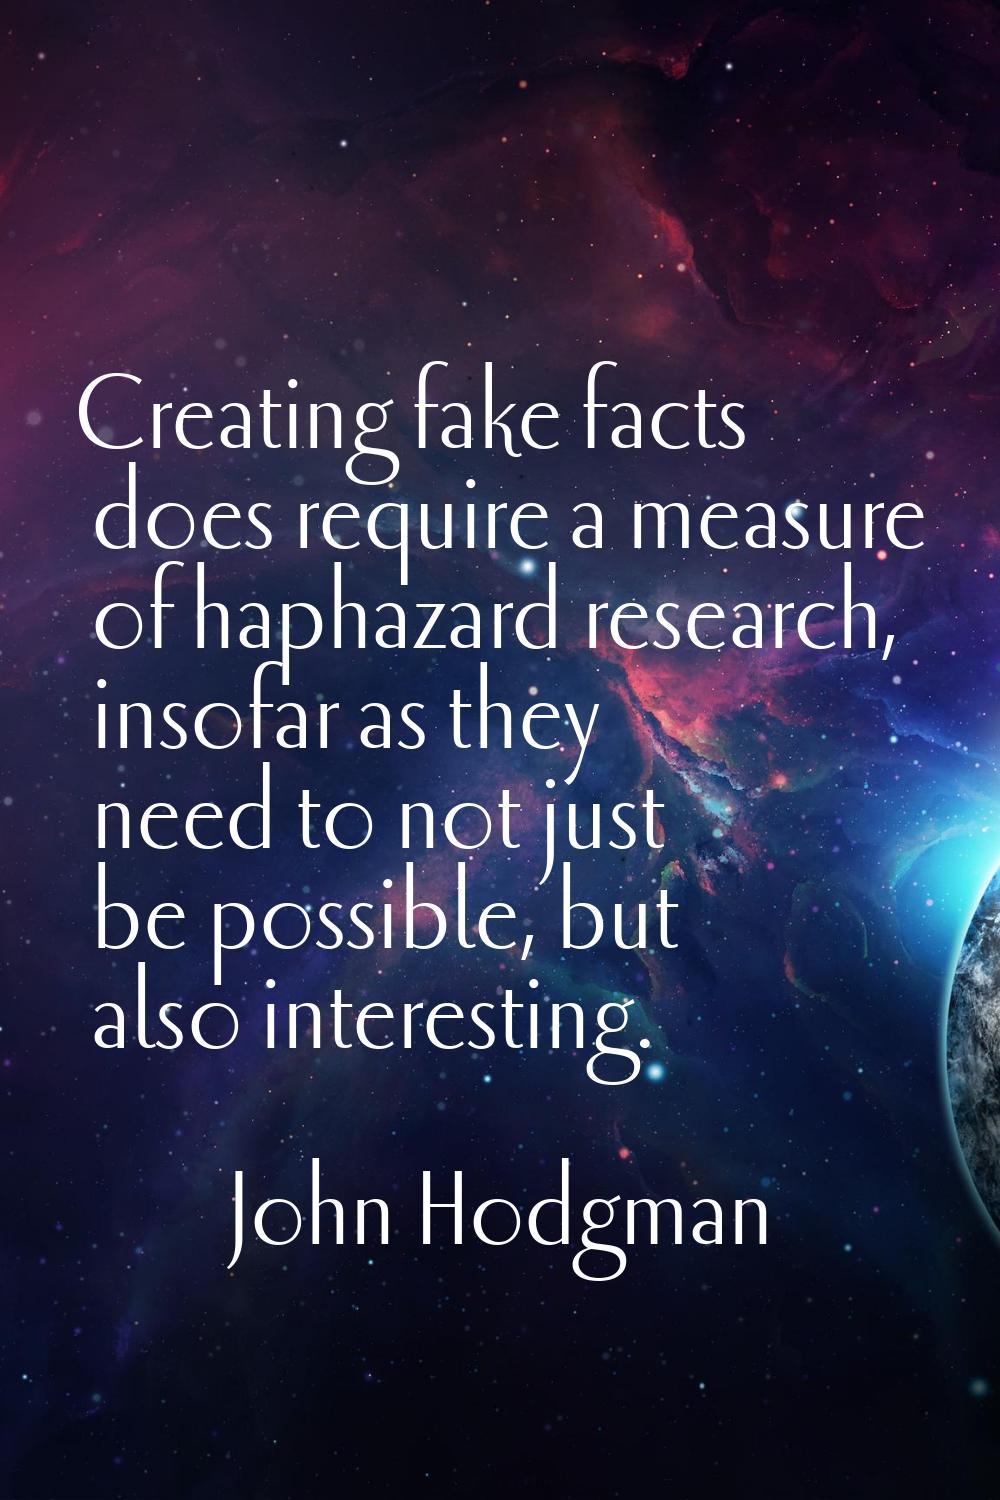 Creating fake facts does require a measure of haphazard research, insofar as they need to not just 